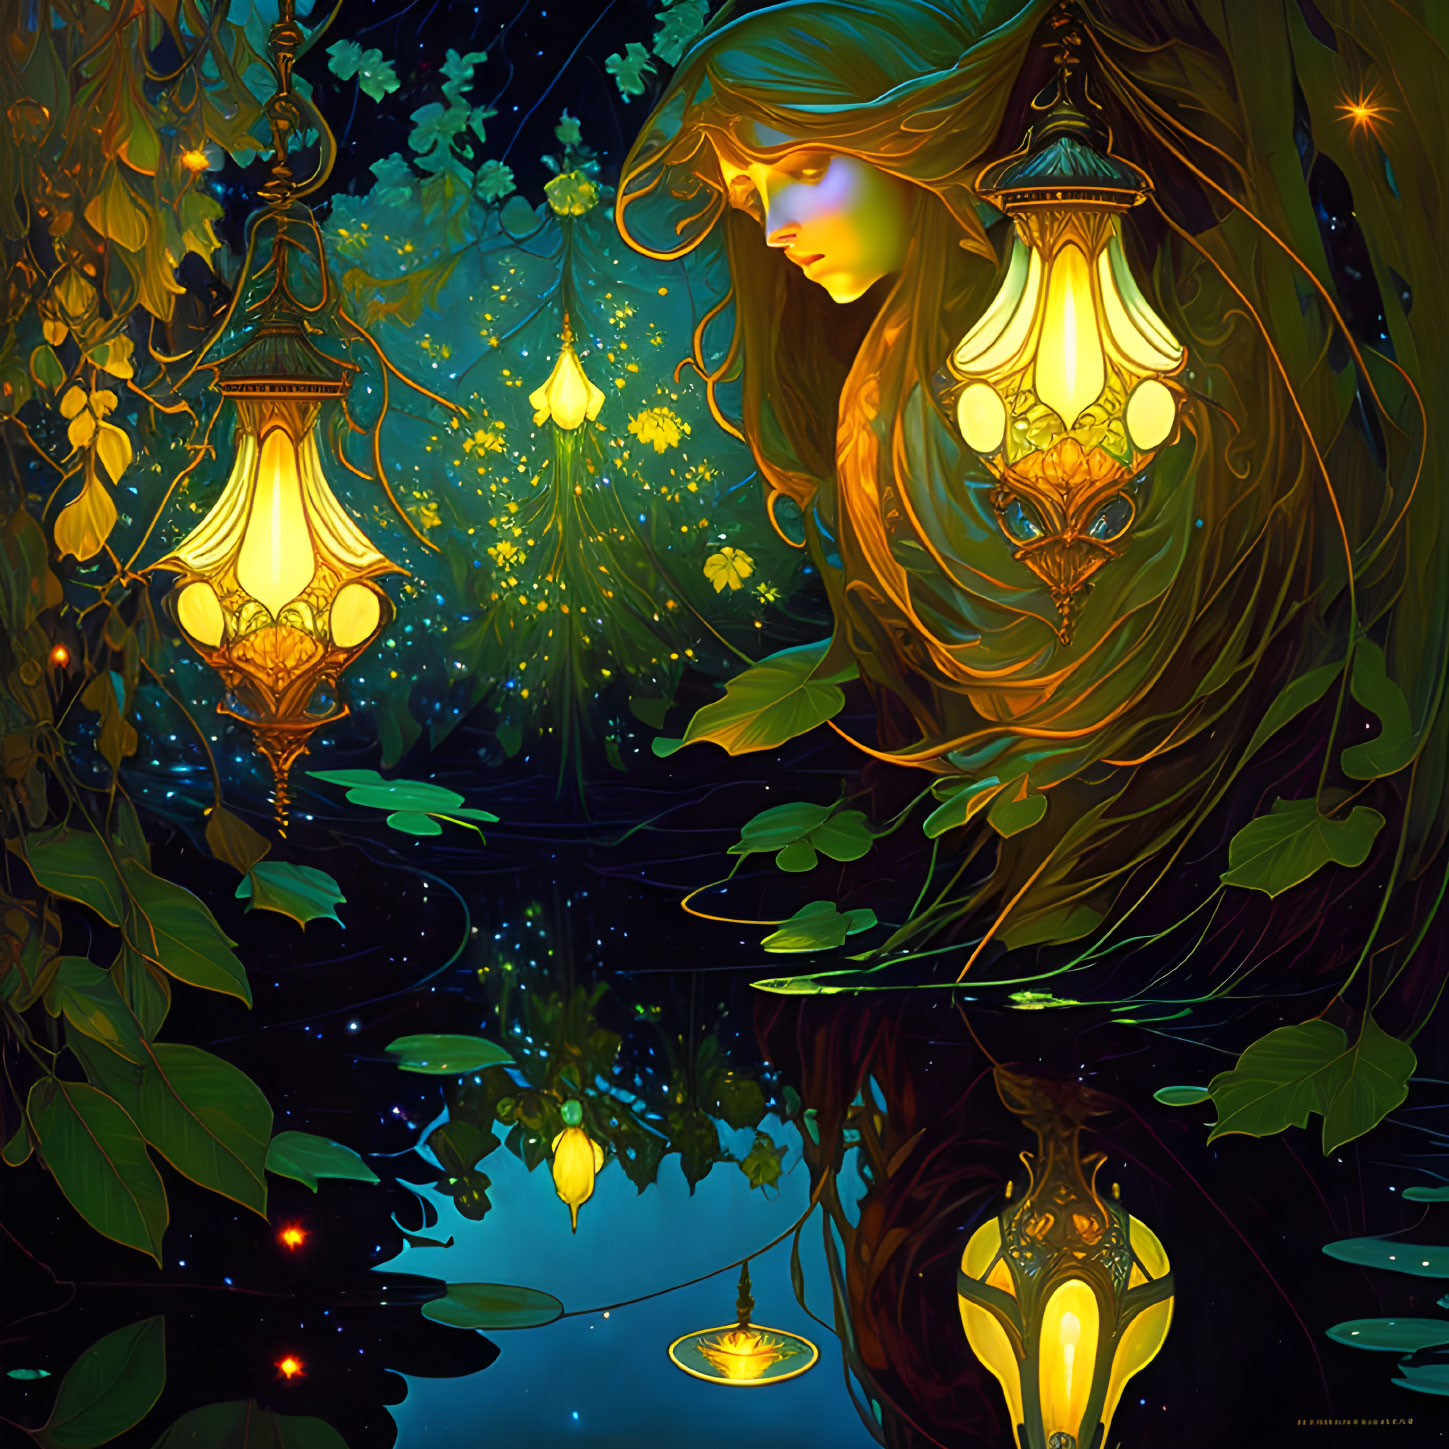 Mystical forest scene with glowing lanterns and serene woman at night